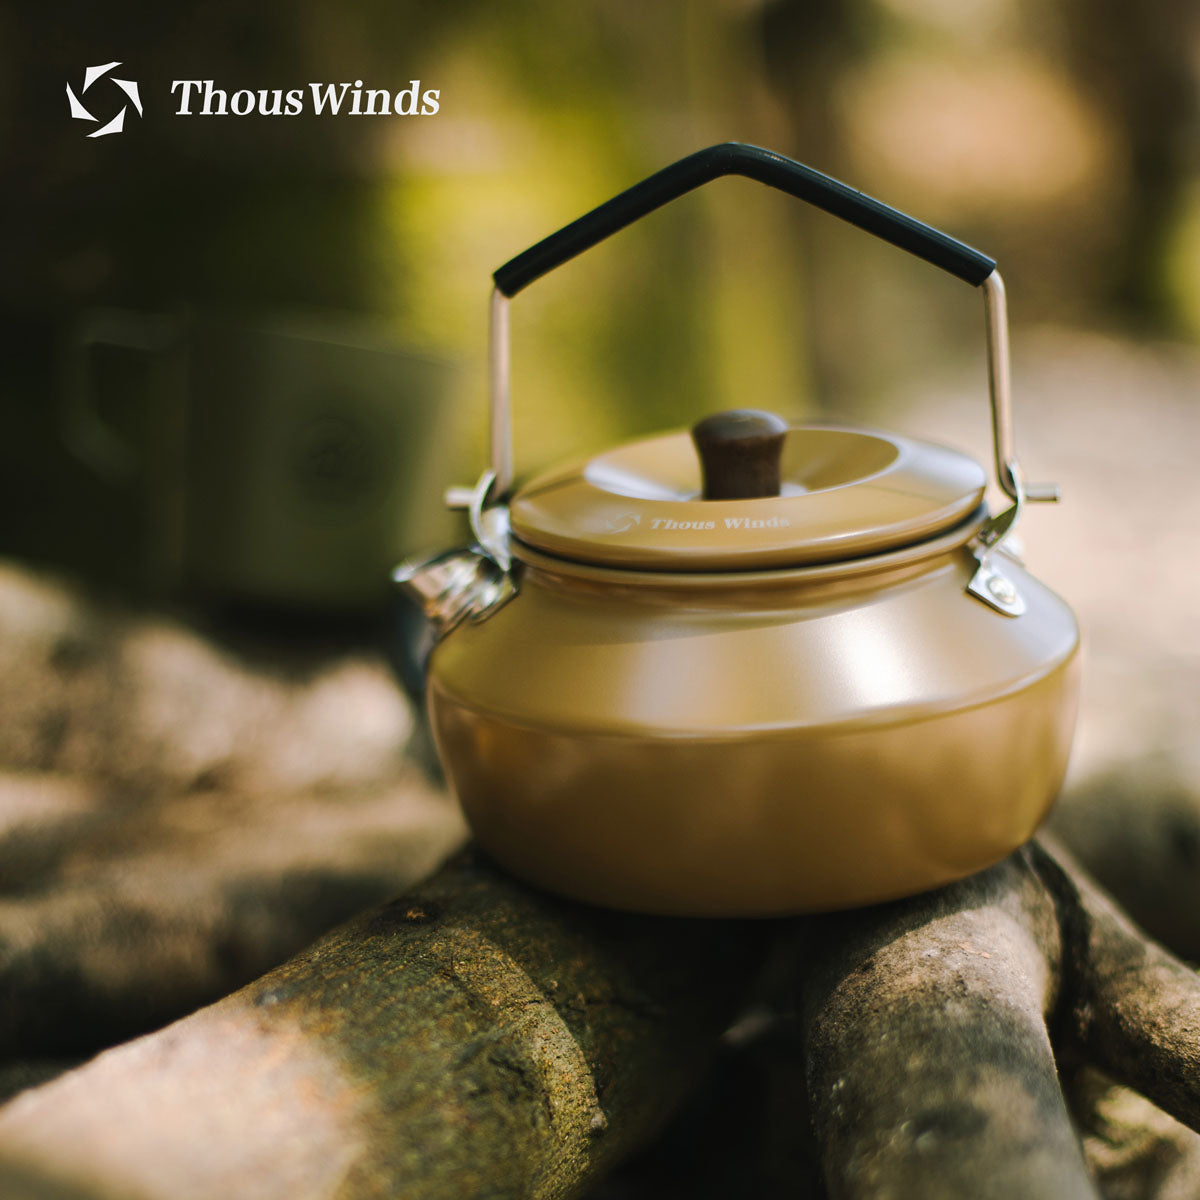 Thous Winds 0.6 Mini Stainless Steel Kettle - Vintage Silver